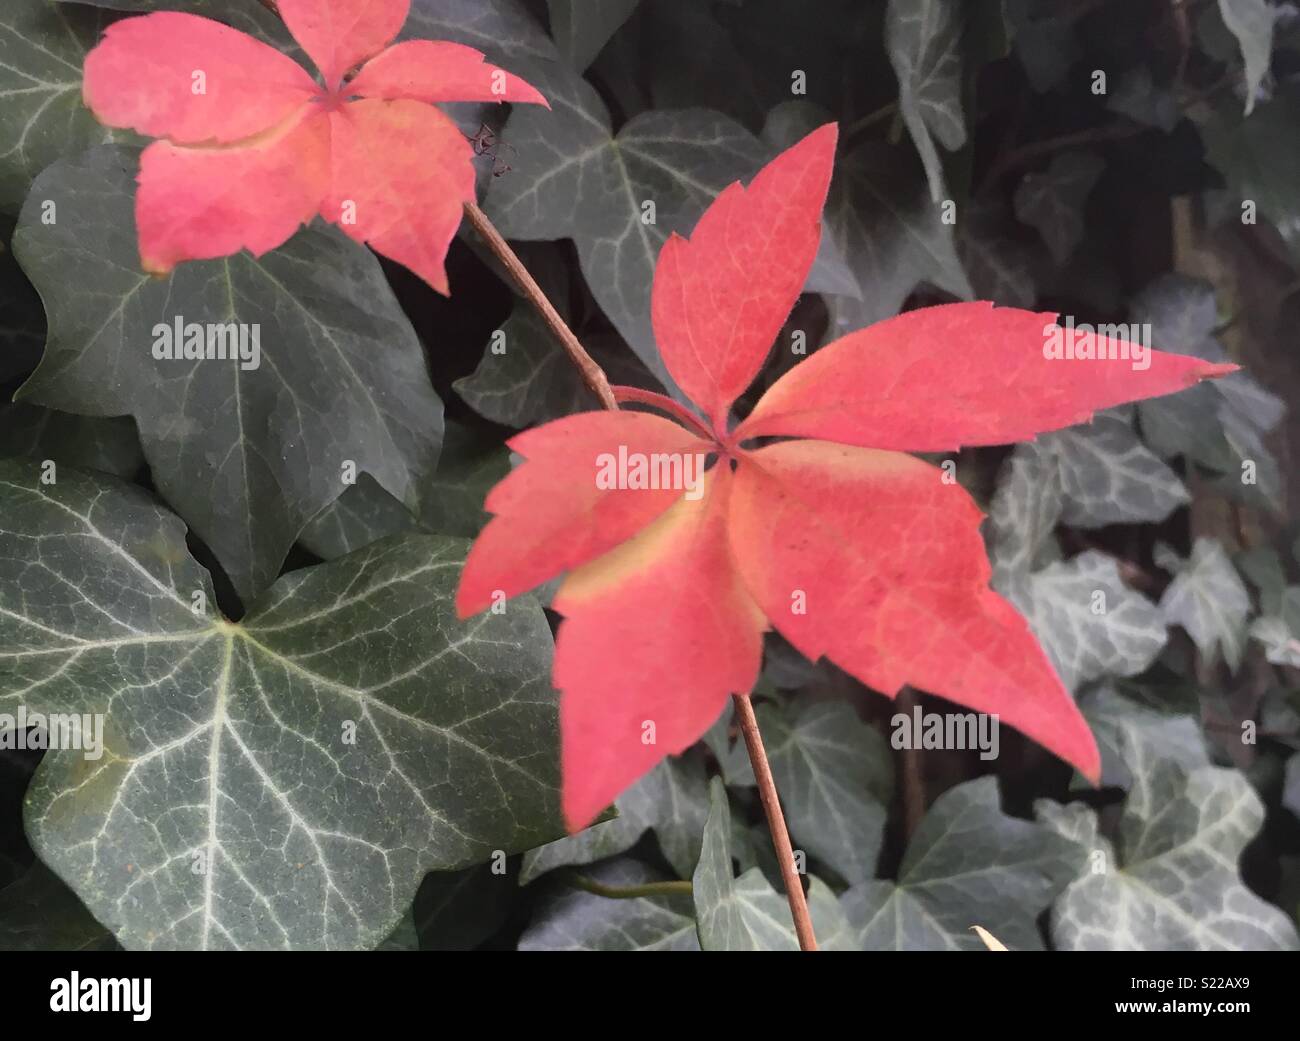 Bright red / pink Autumn leaves on a background of Ivy leaf foliage. Stock Photo